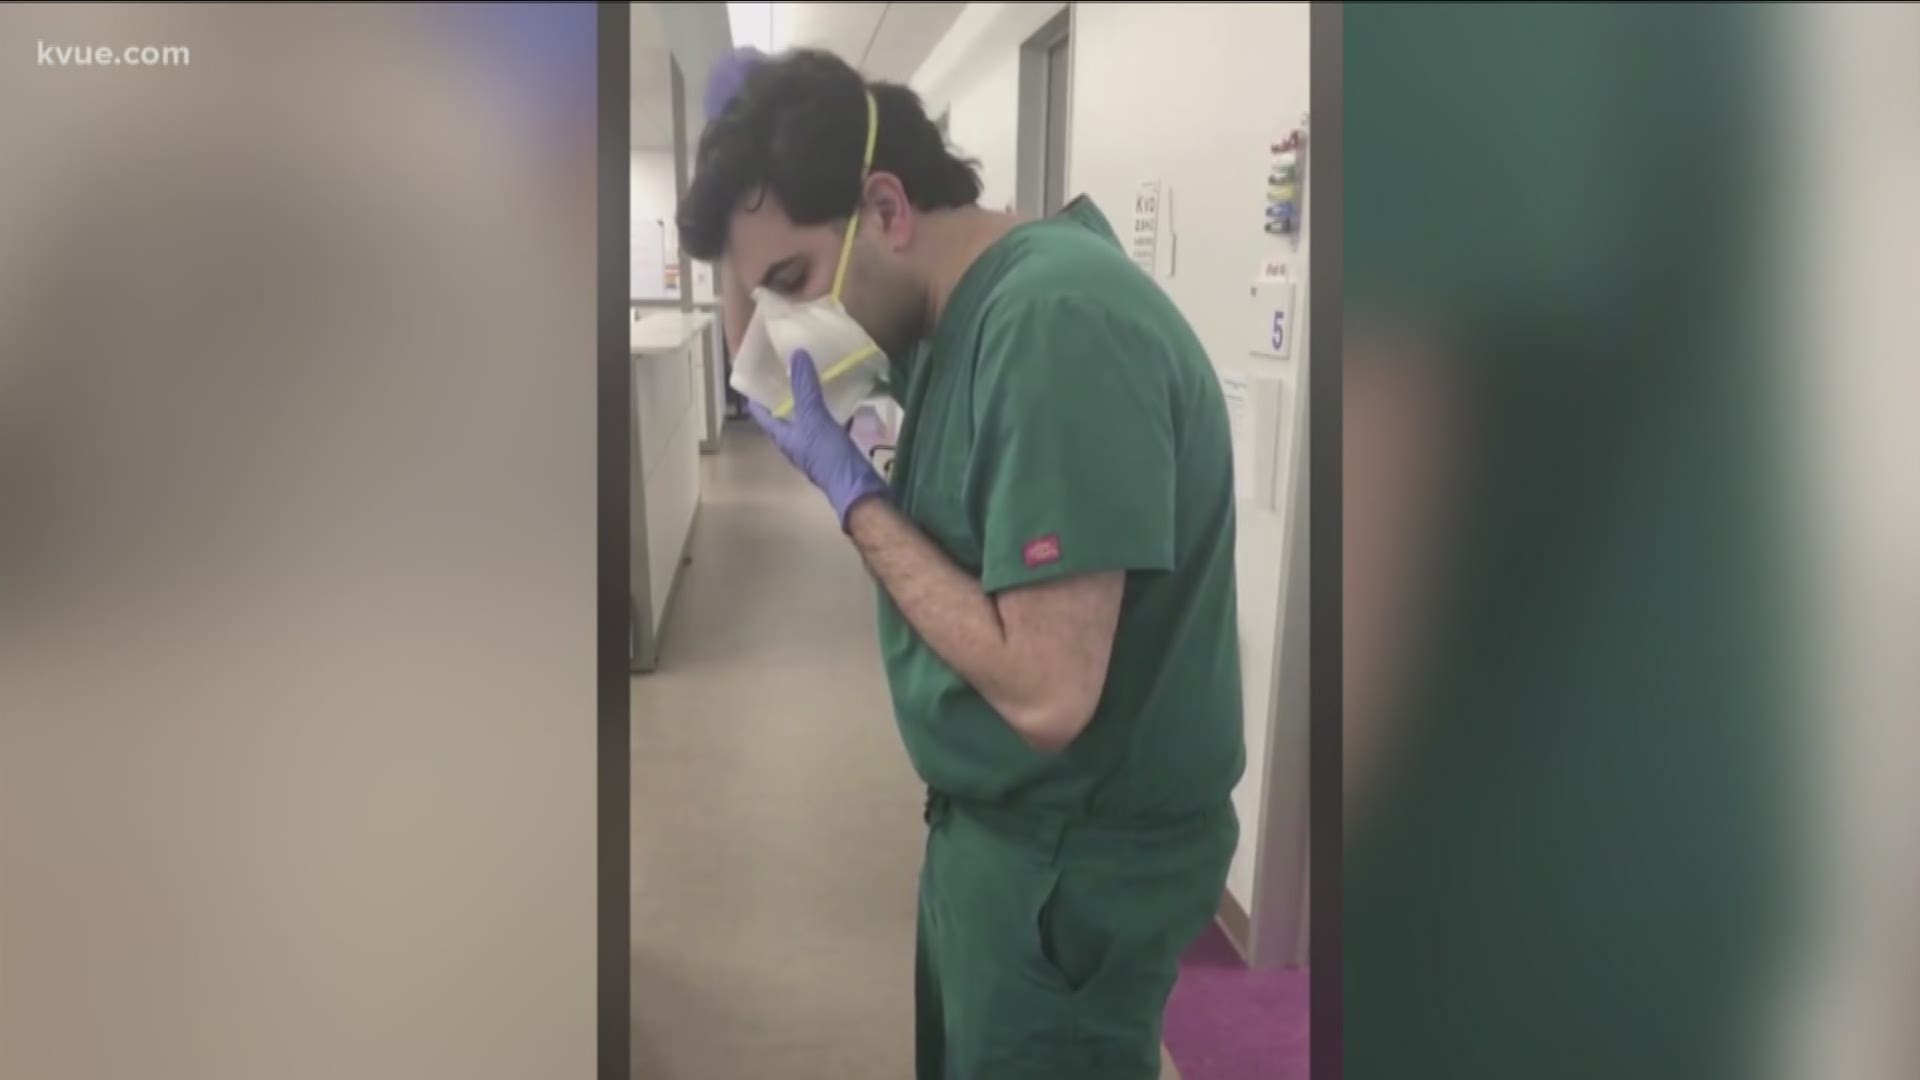 A Texas physician said reusing PPE has become an everyday occurrence when it shouldn't be.